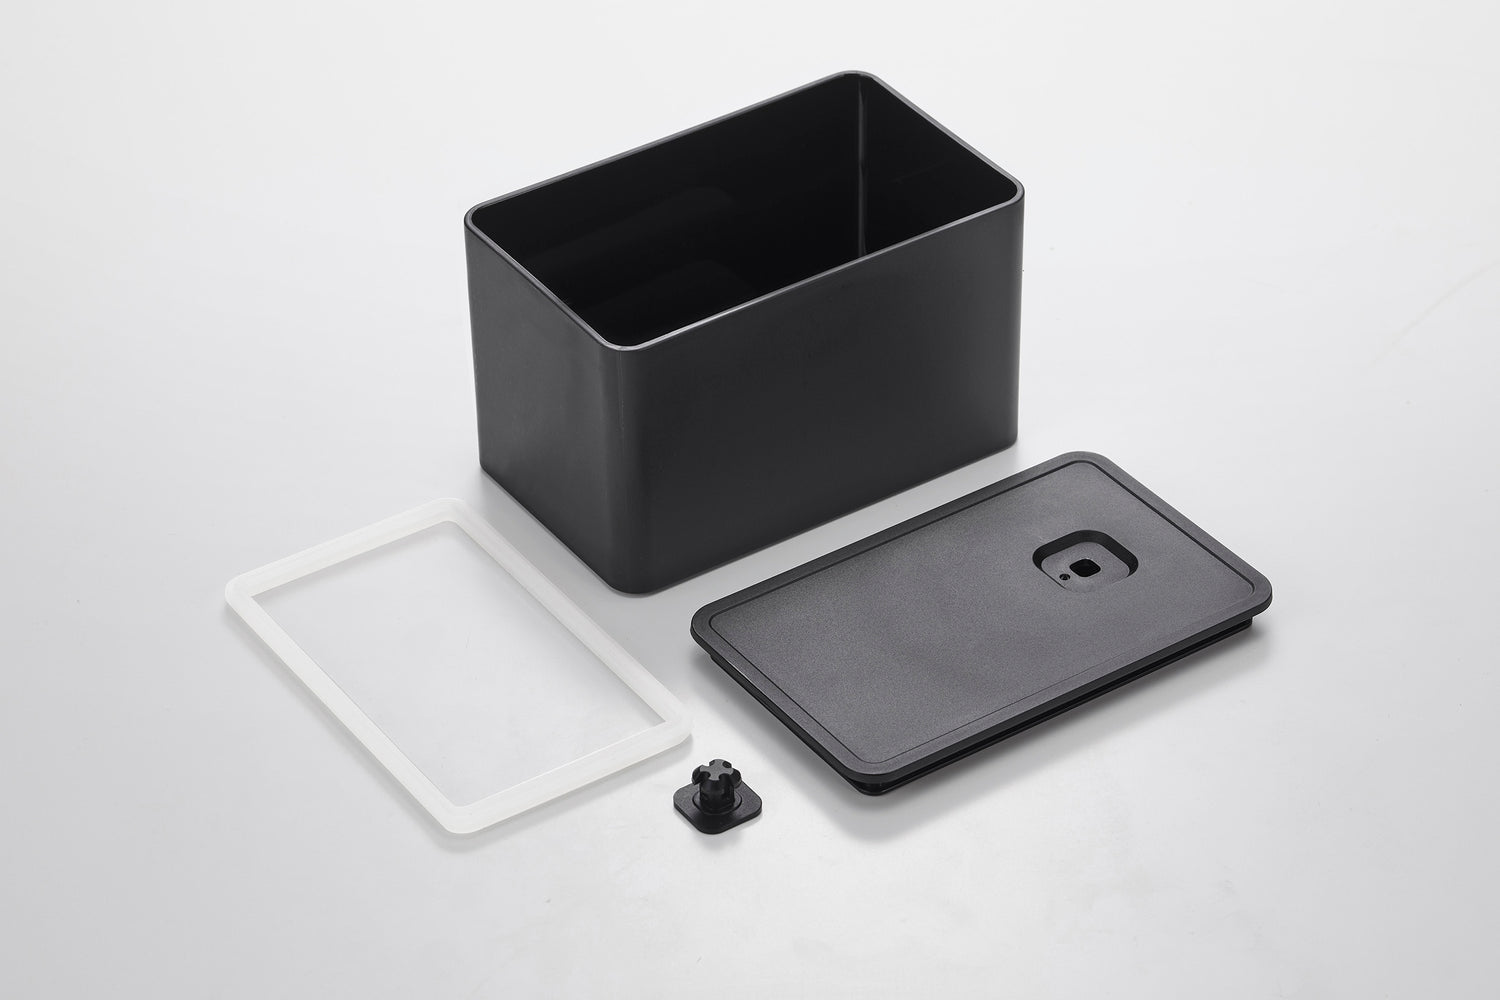 View 12 - Black Vacuum-Sealing Butter Dish disassembled on white background by Yamazaki Home.